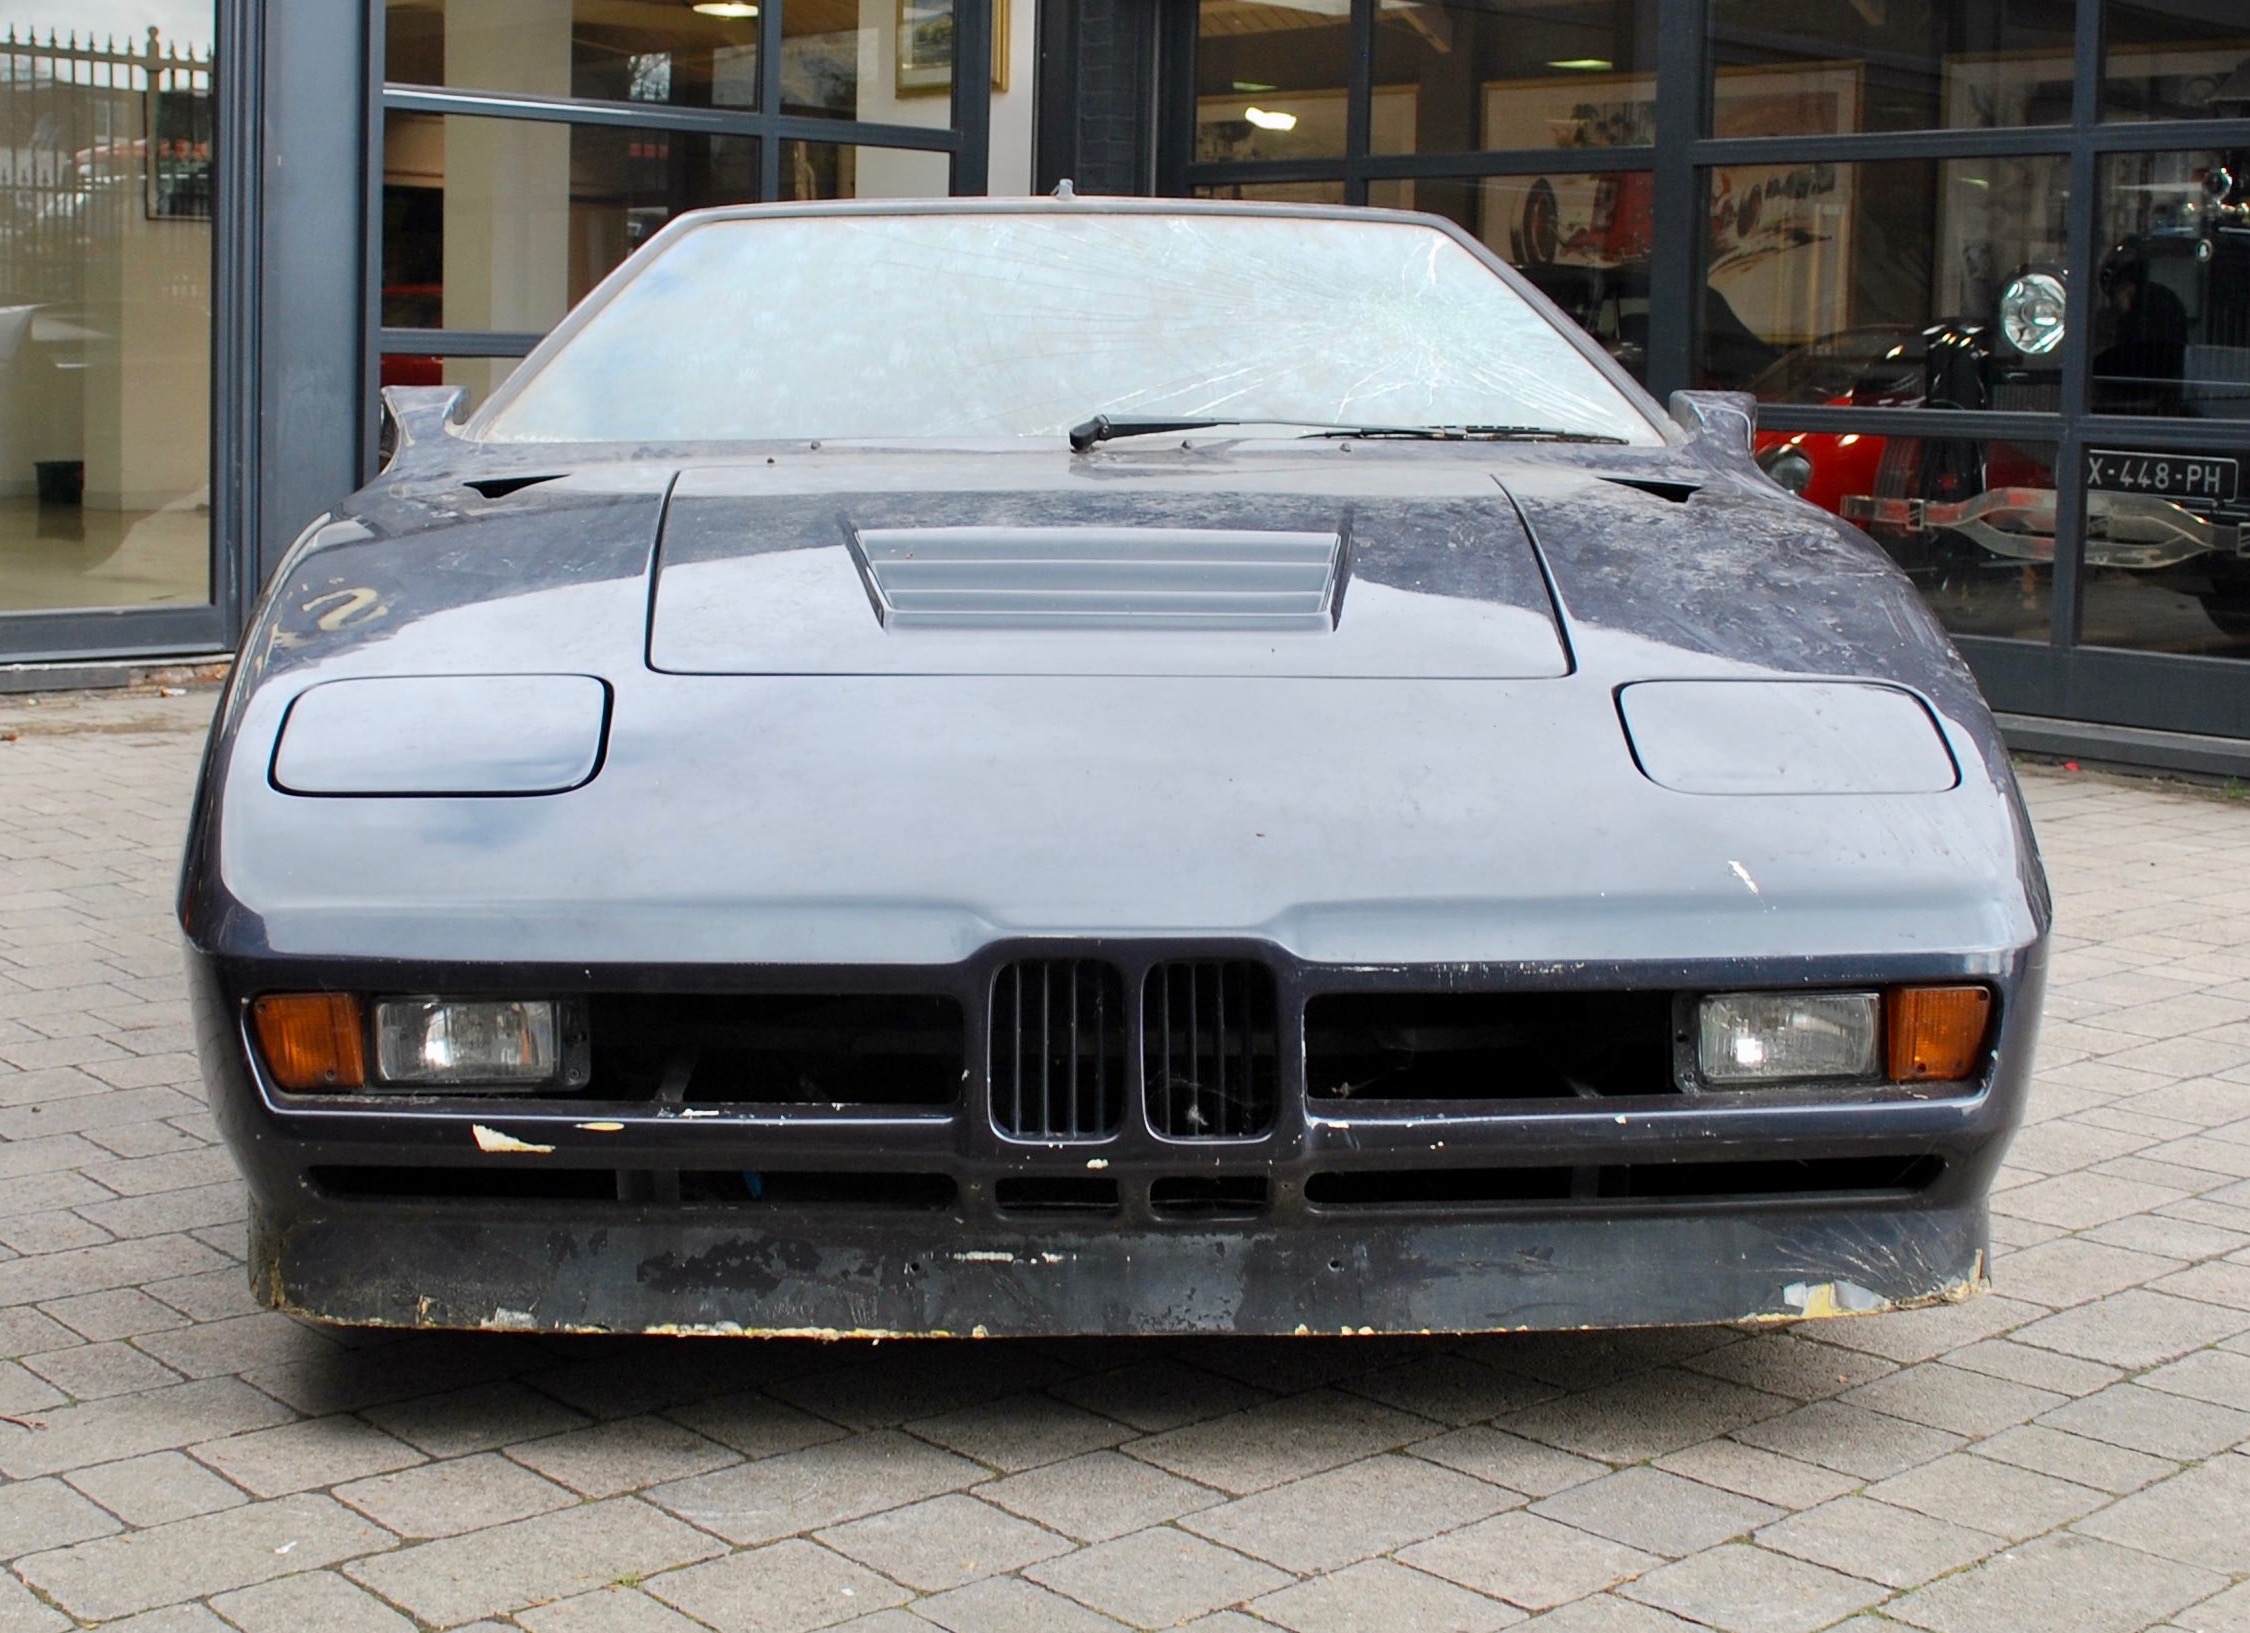 BMW M1, Record-setting M1 found in garage and heading to auction, ClassicCars.com Journal